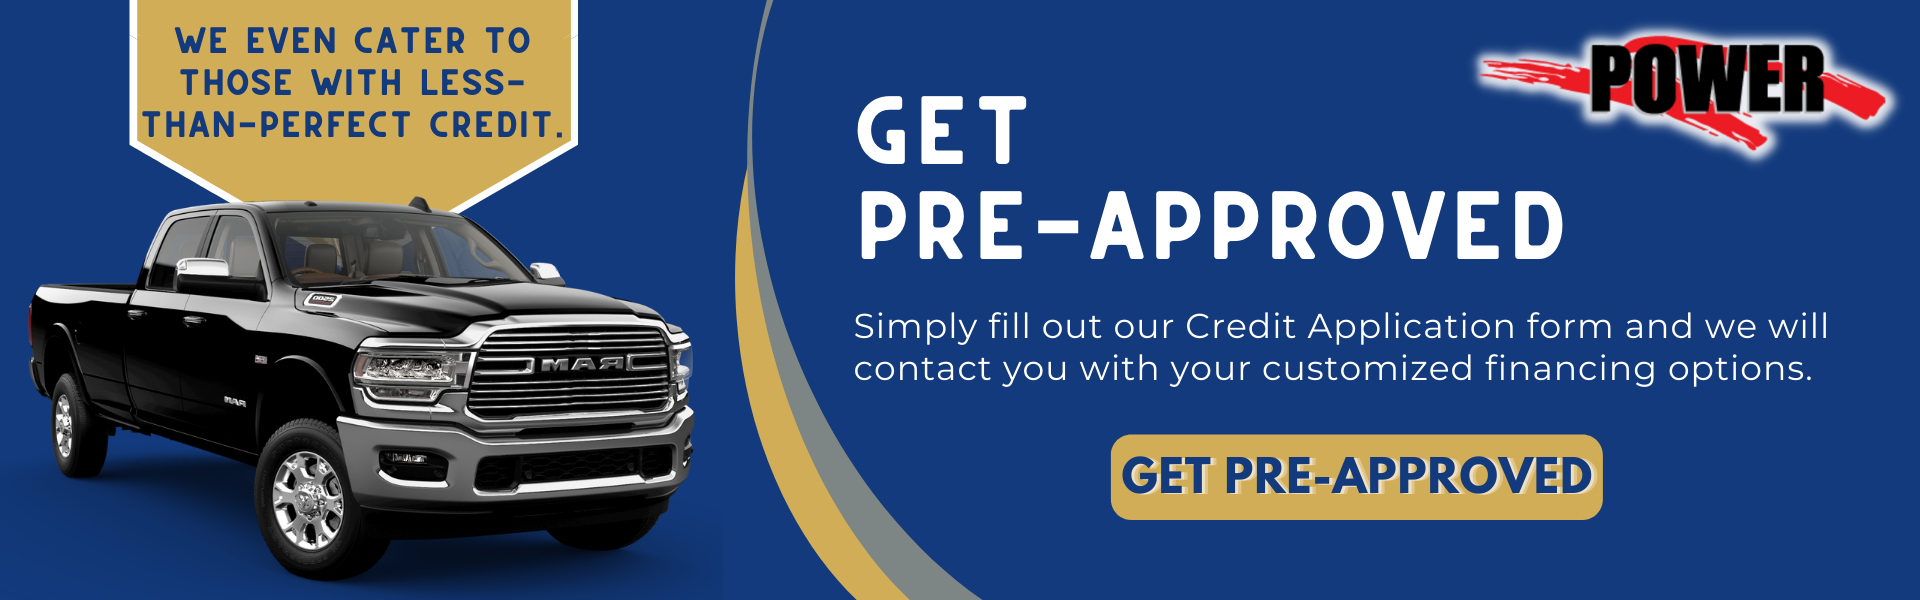 Get pre-approved with a credit application